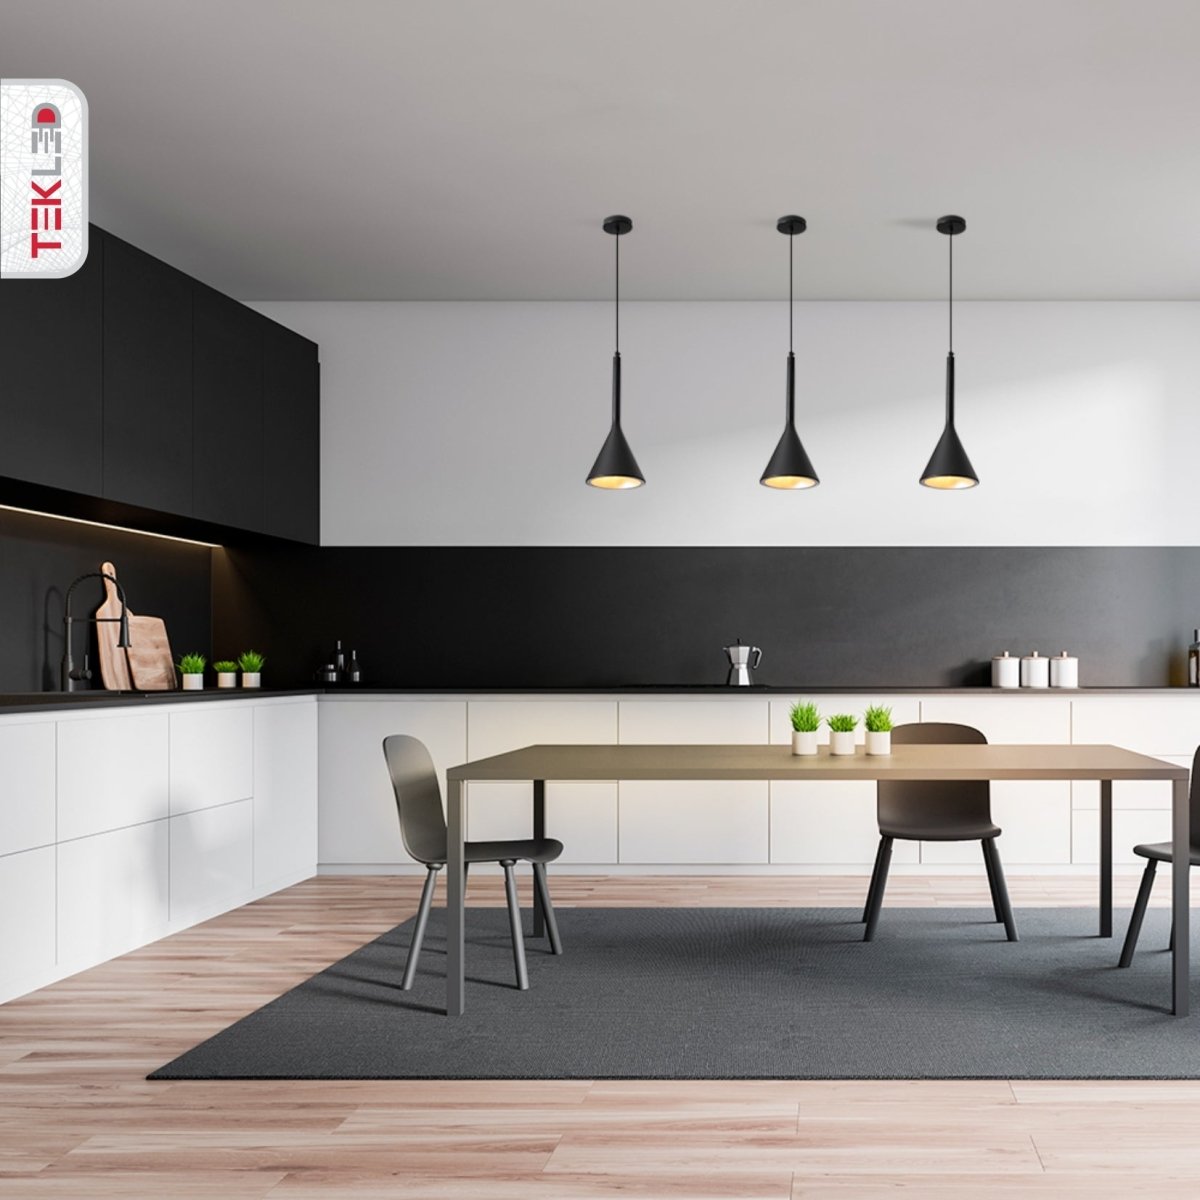 More interior usage of Black Funnel Nordic Modern Metal Ceiling Pendant Light with E27 Fitting | TEKLED 150-18394